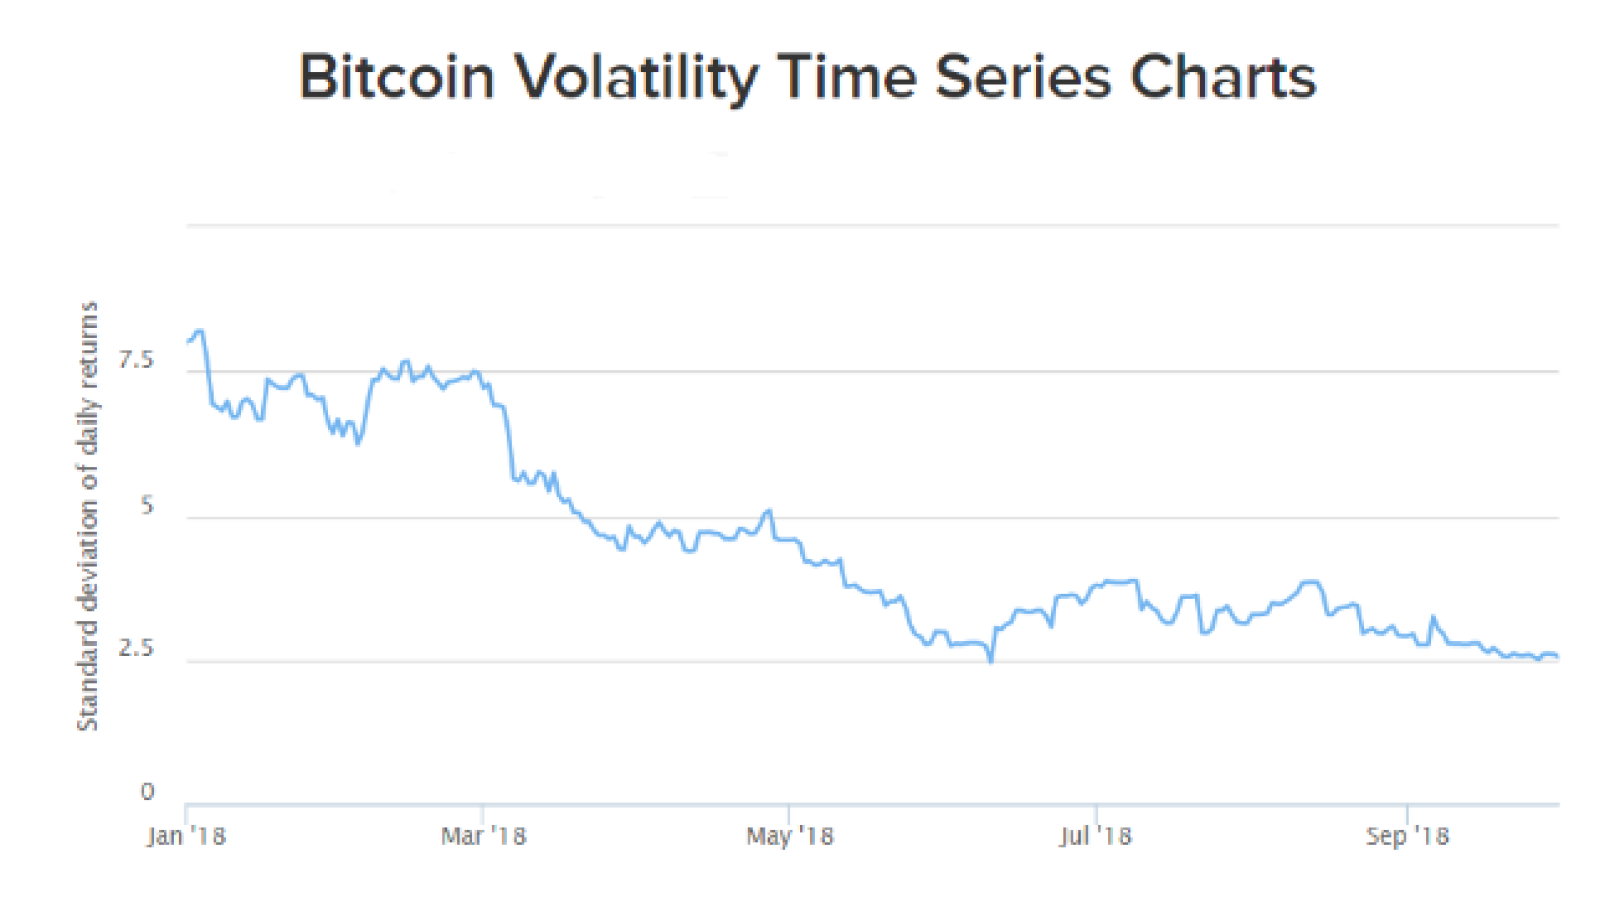 Bitcoin’s Wild Volatility and Trading Volumes Have Cooled, Are Traders Bored?